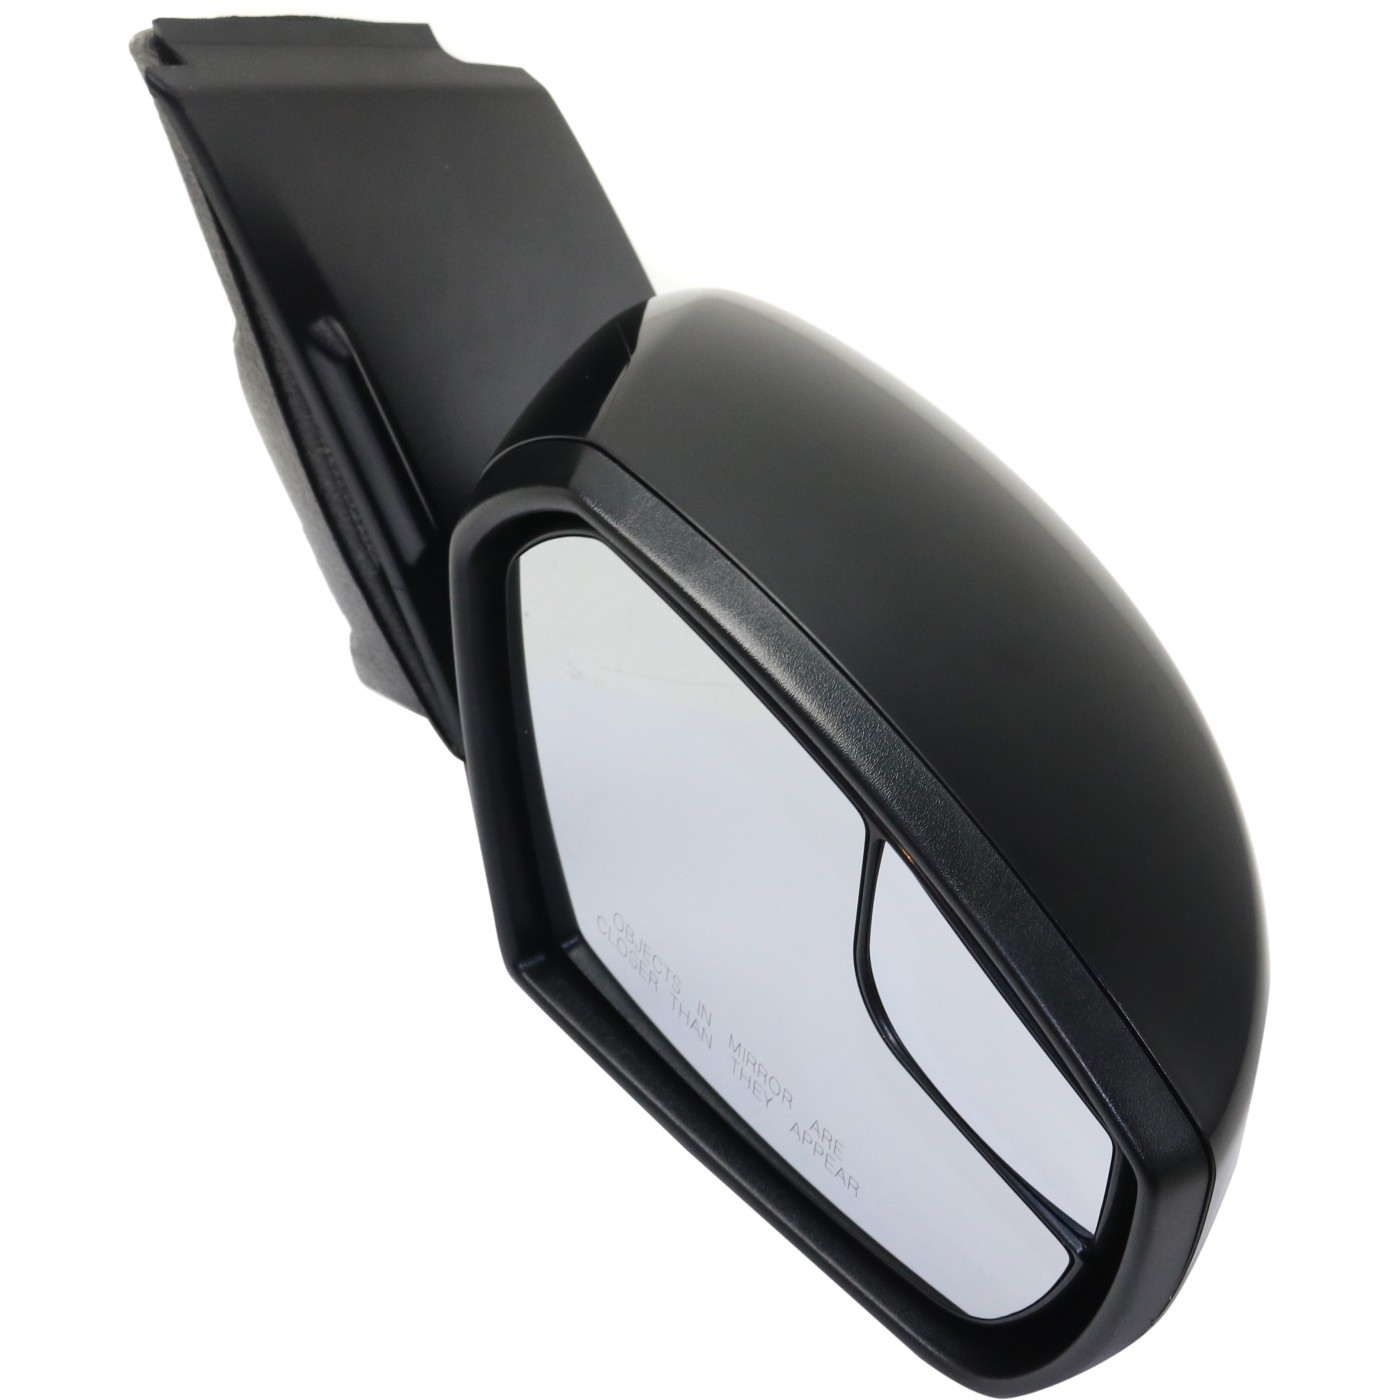 New Mirror Passenger Right Side RH Hand for Ford Escape 2017-2019 FO1321565 | eBay 2017 Ford Explorer Passenger Side Mirror Replacement